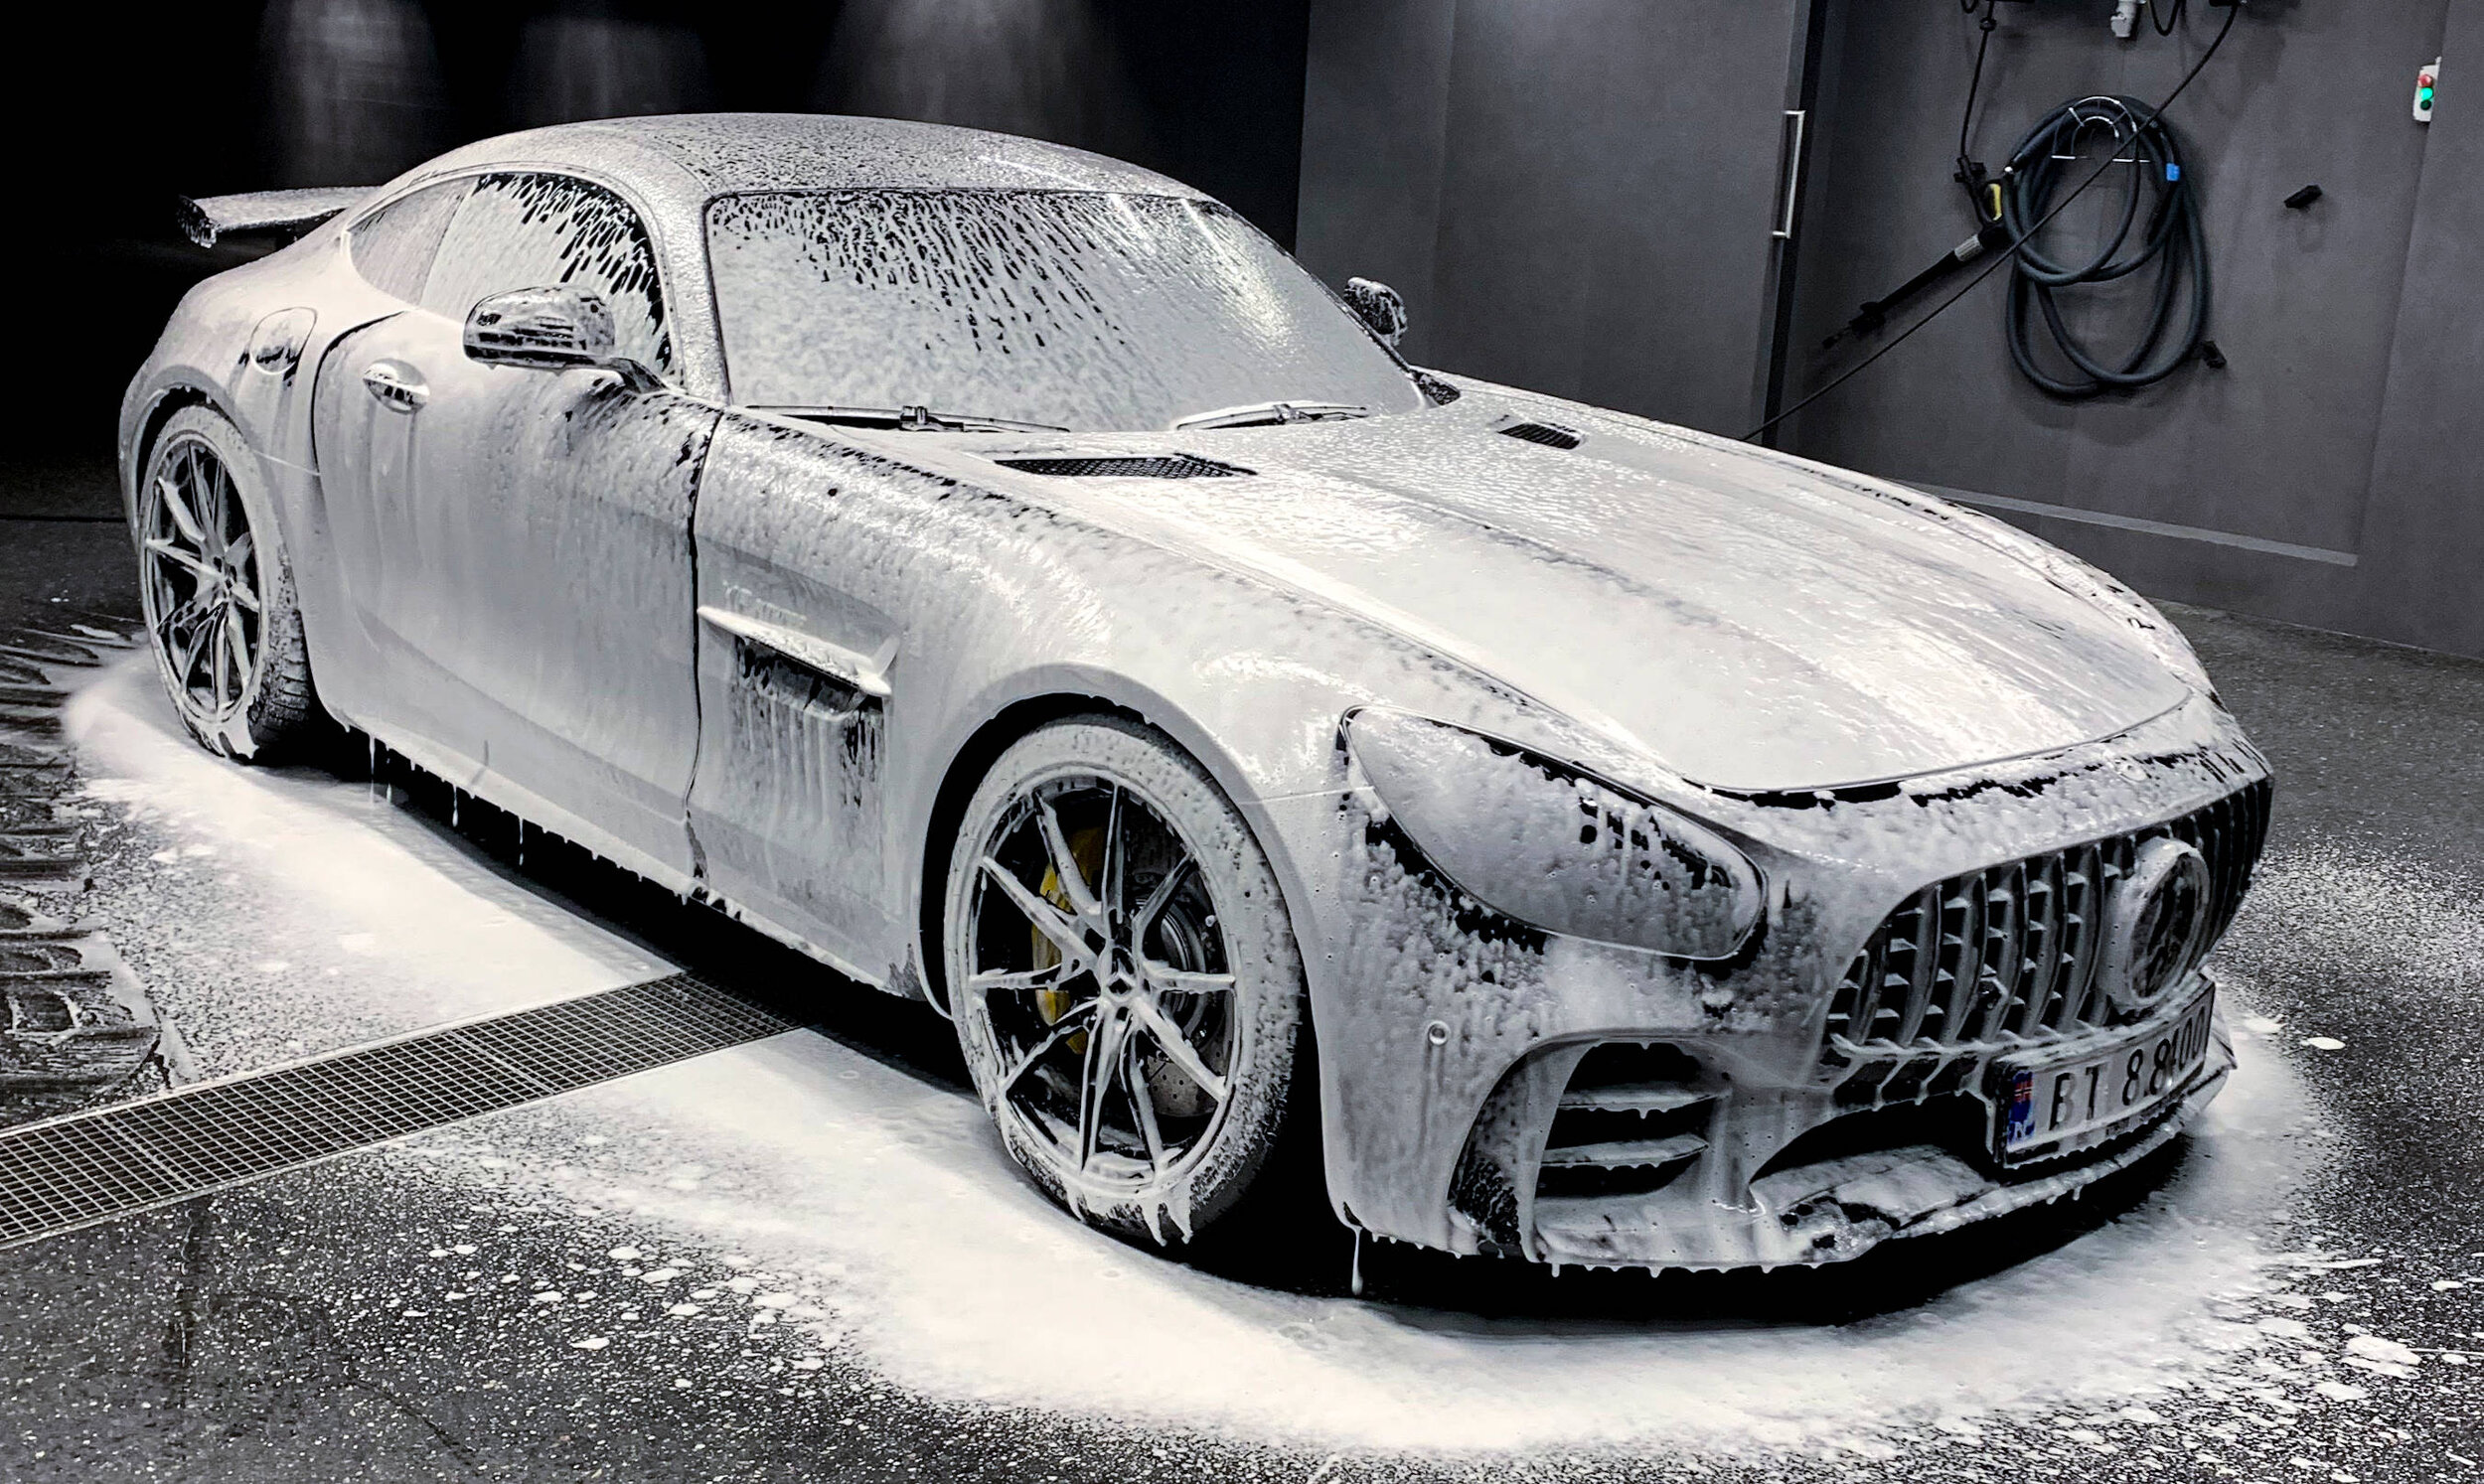 Do you snow foam your car before you start cleaning it?